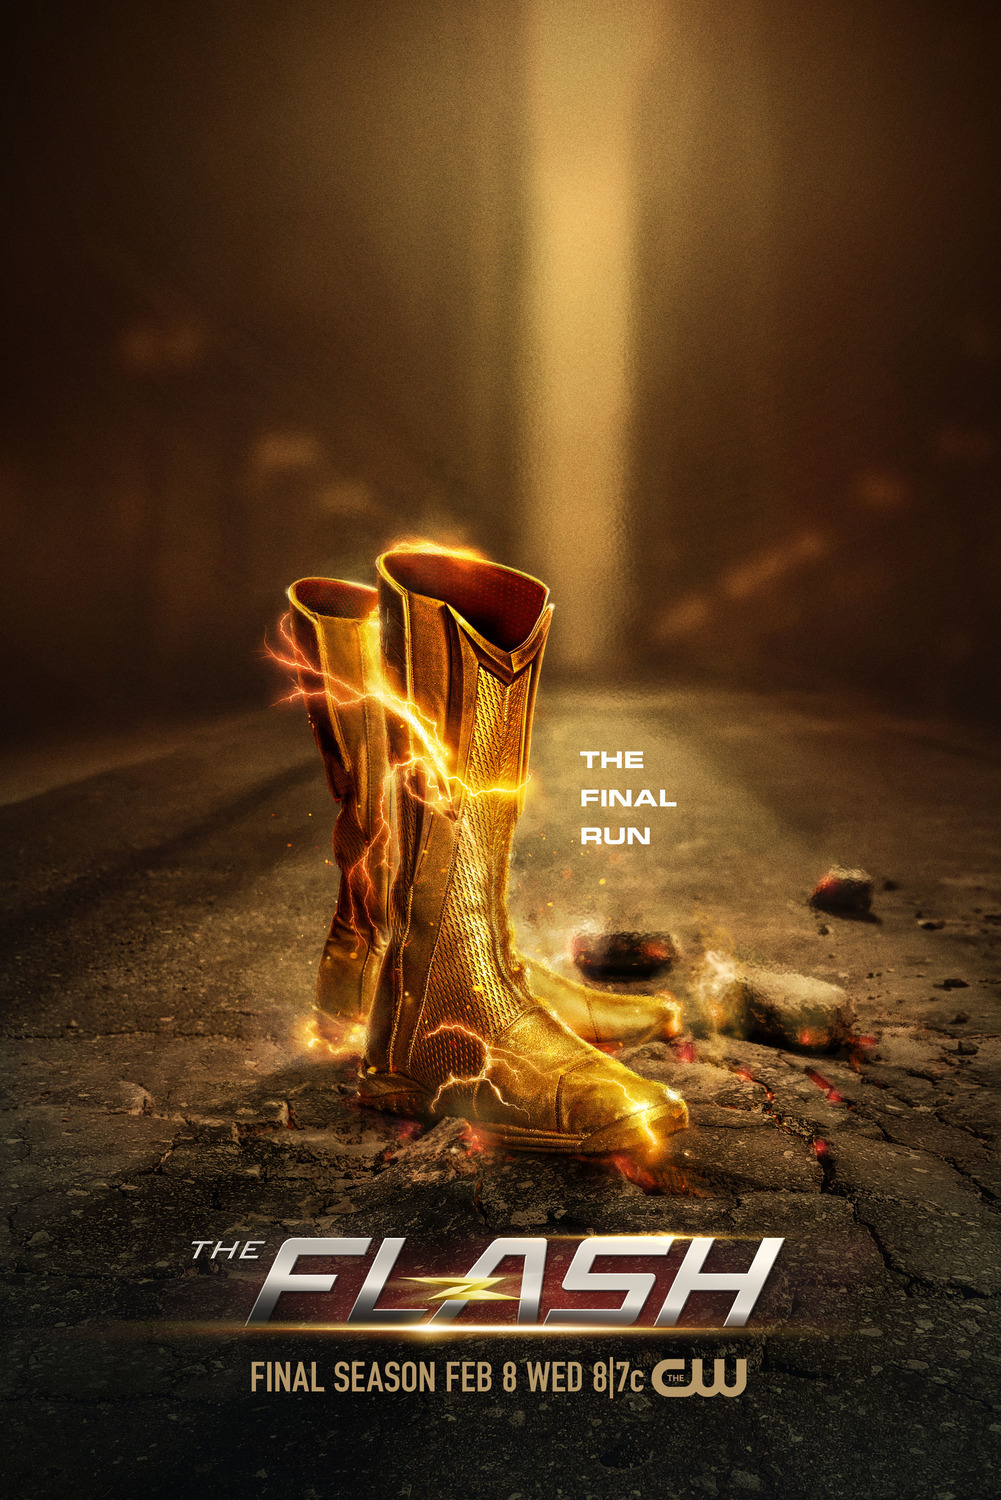 Extra Large TV Poster Image for The Flash (#55 of 65)